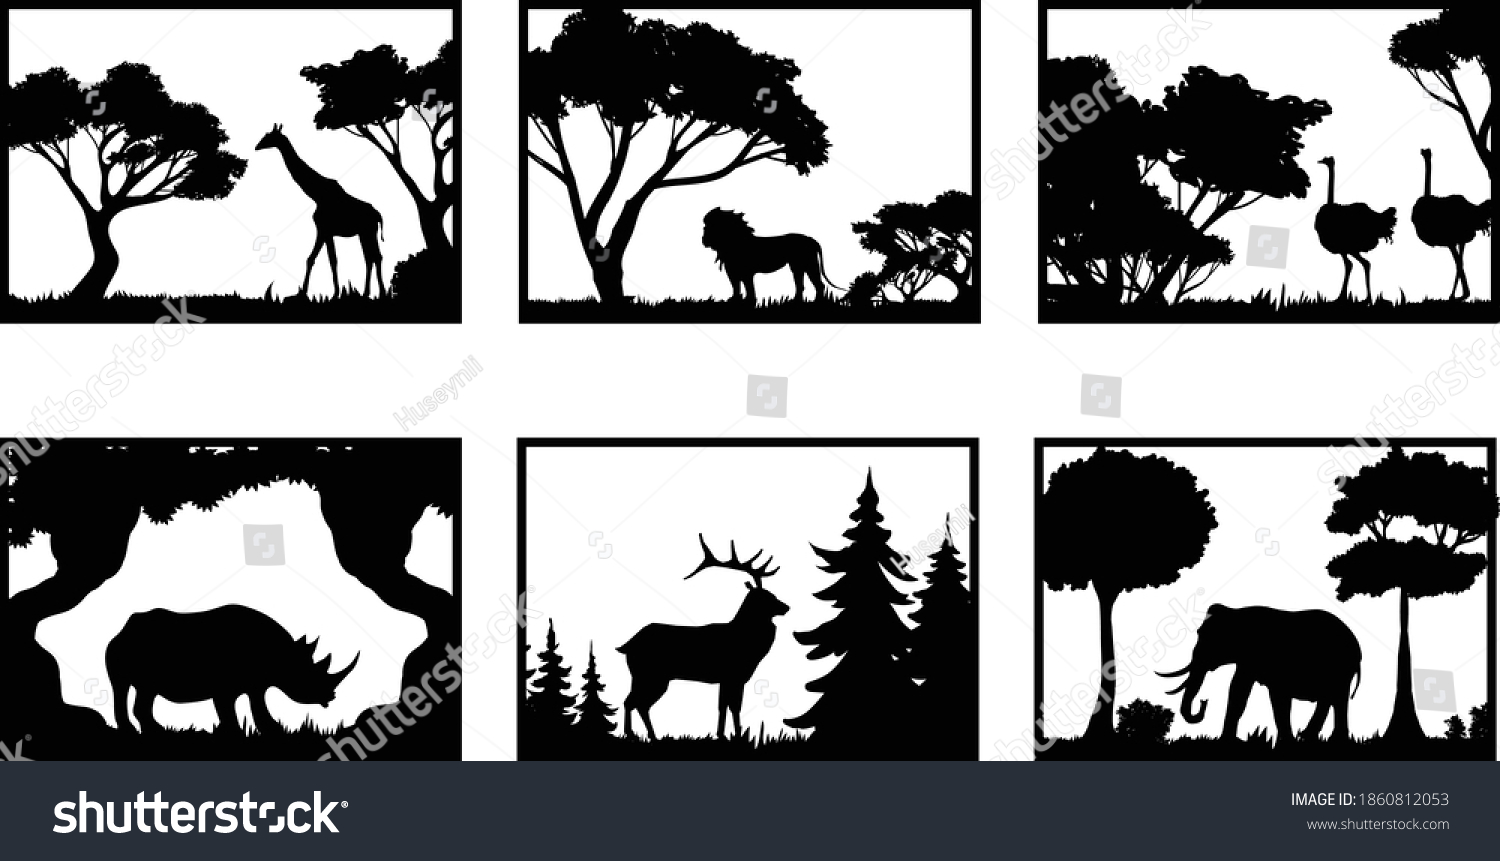 SVG of 6 Wildlife scenes with animals 3D models and vector files. | cnc file, laser cutting file | Dxf, Svg, Max, Cdr, Eps, FBX, AI, 3DS |Set 099| svg